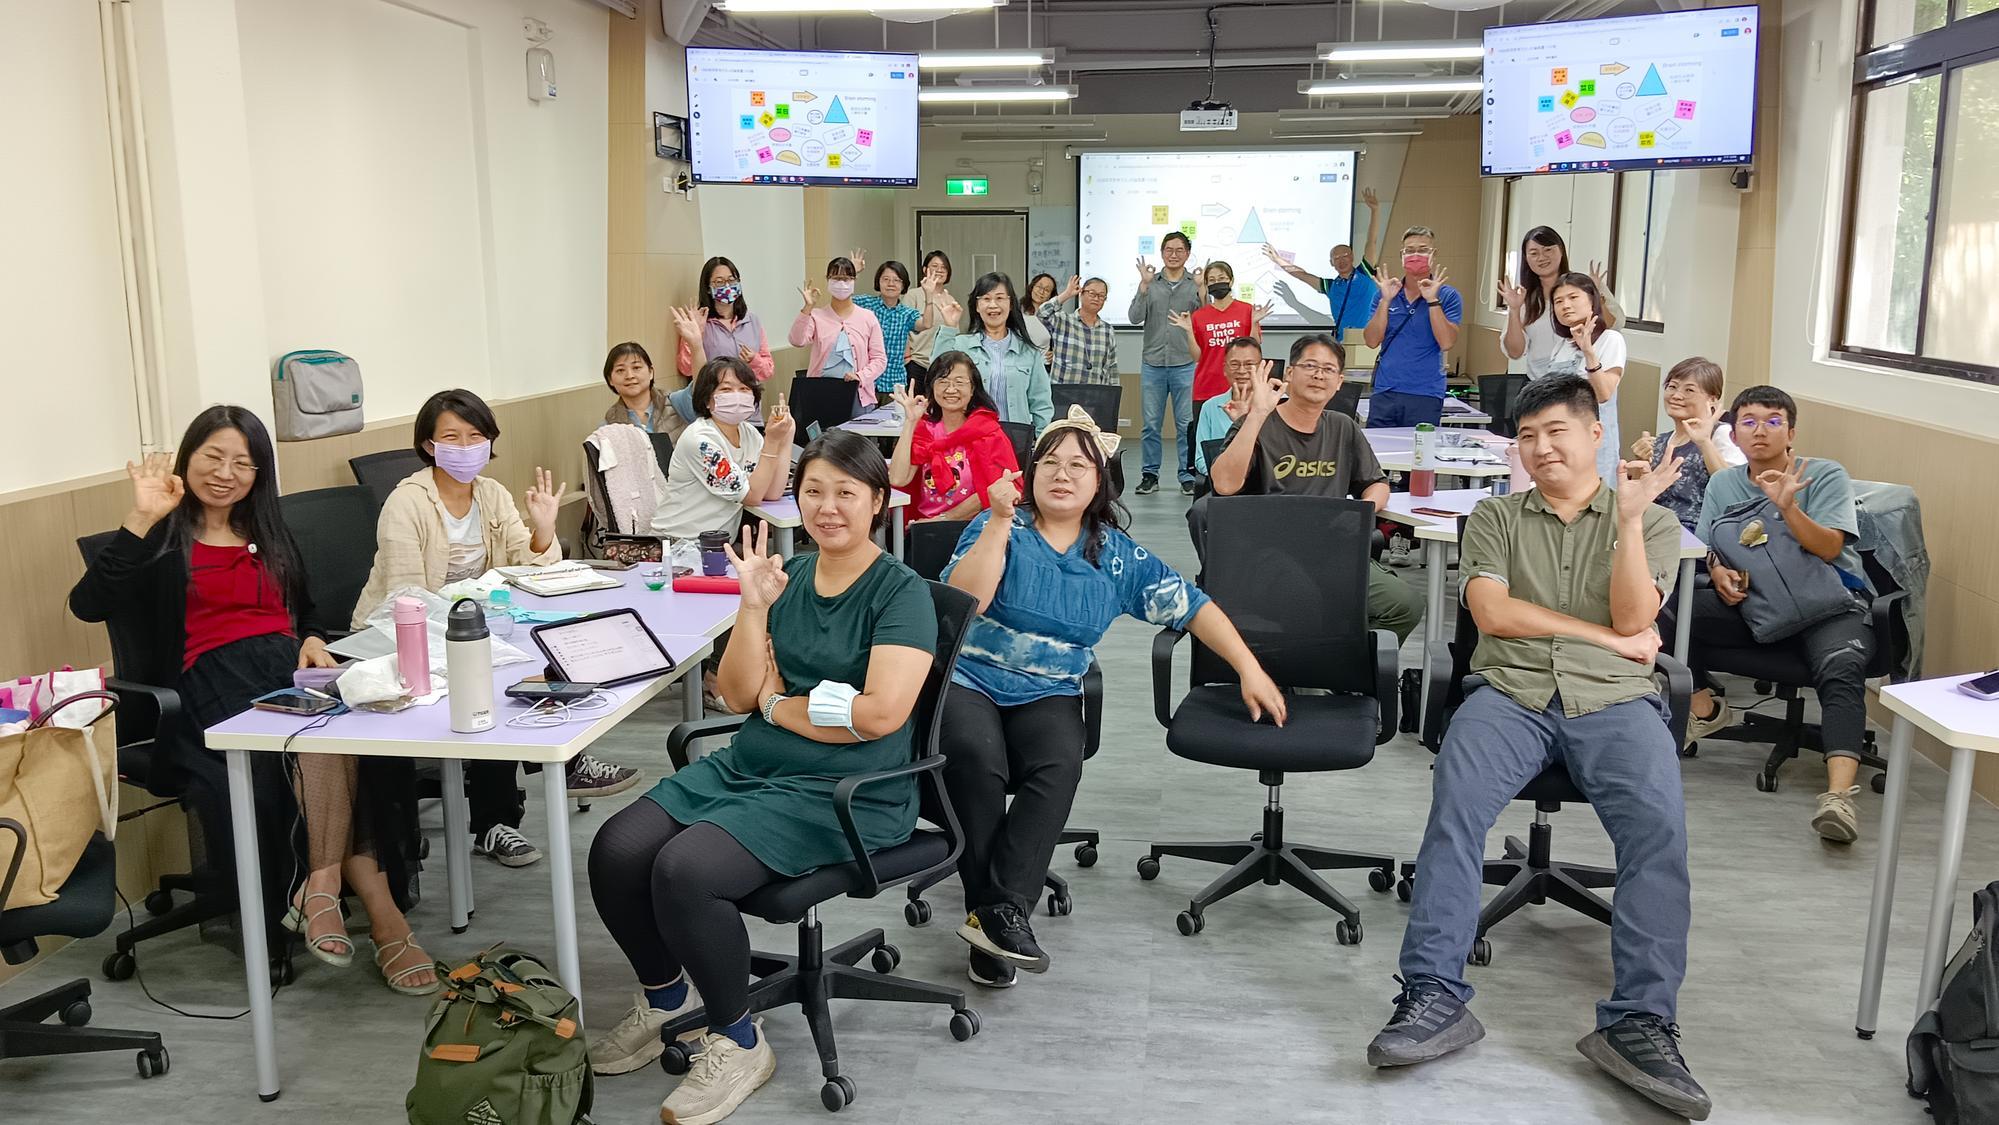 The workshop for Food and Agriculture Education in Greater Hsinchu featured award-winning lecturer Hsing-Wei Chiu (邱星崴), recently honored with the Outstanding Achievement Award in the Youth Contribution category by the Hakka Affairs Council. Chiu shared several insights during the themed workshop.